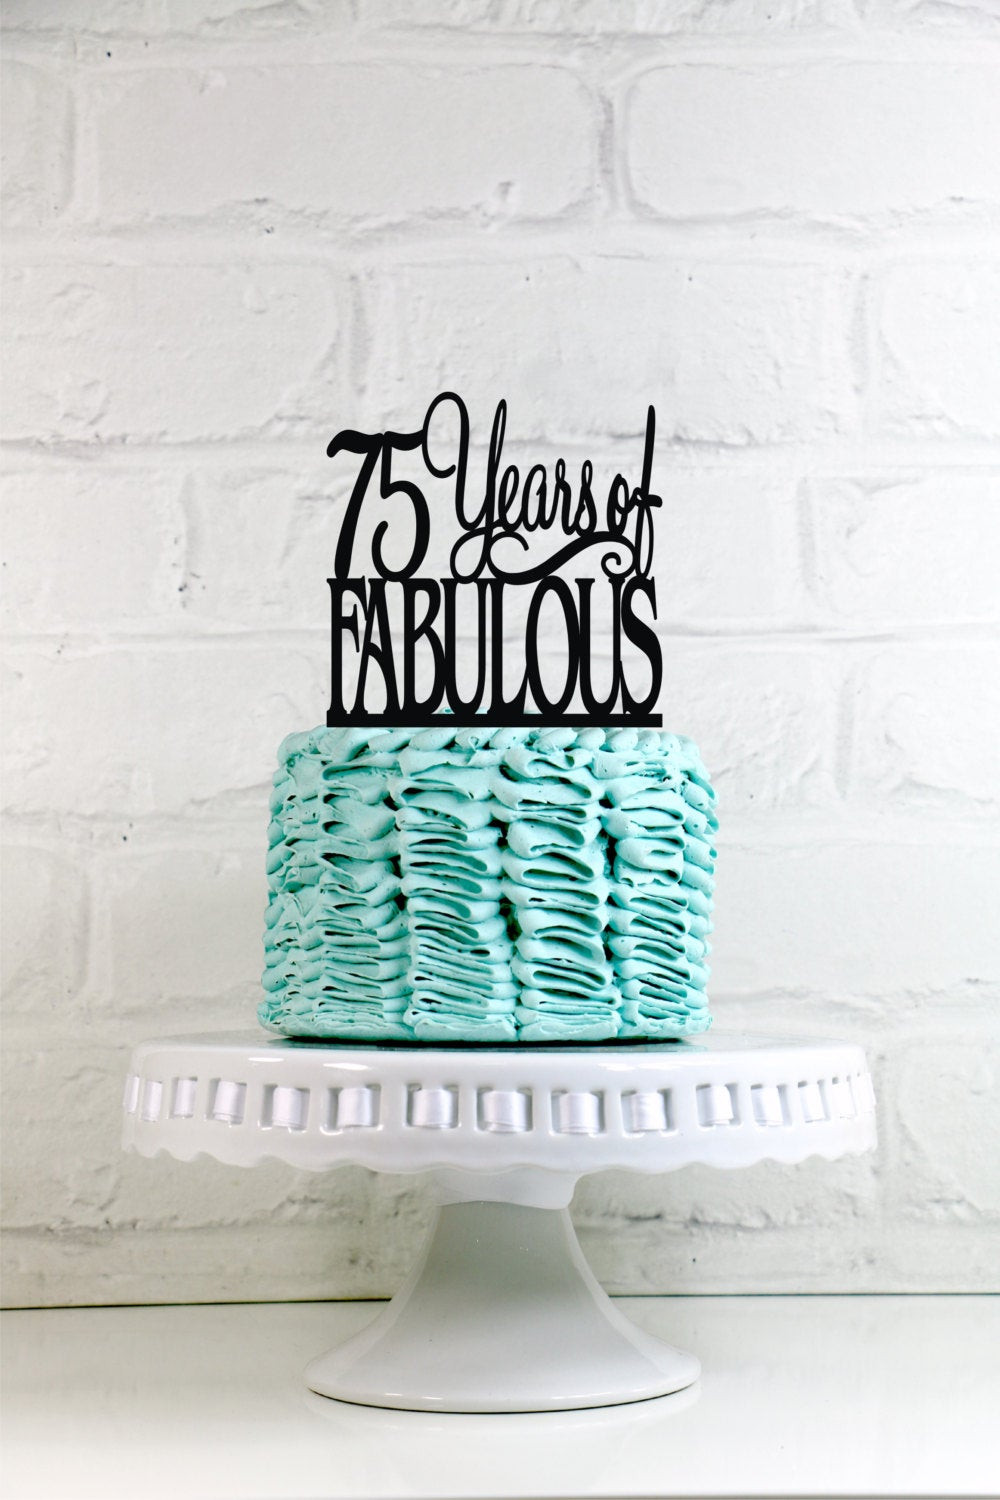 75 Birthday Decorations
 75 Years of Fabulous 75th Birthday Cake Topper or Sign